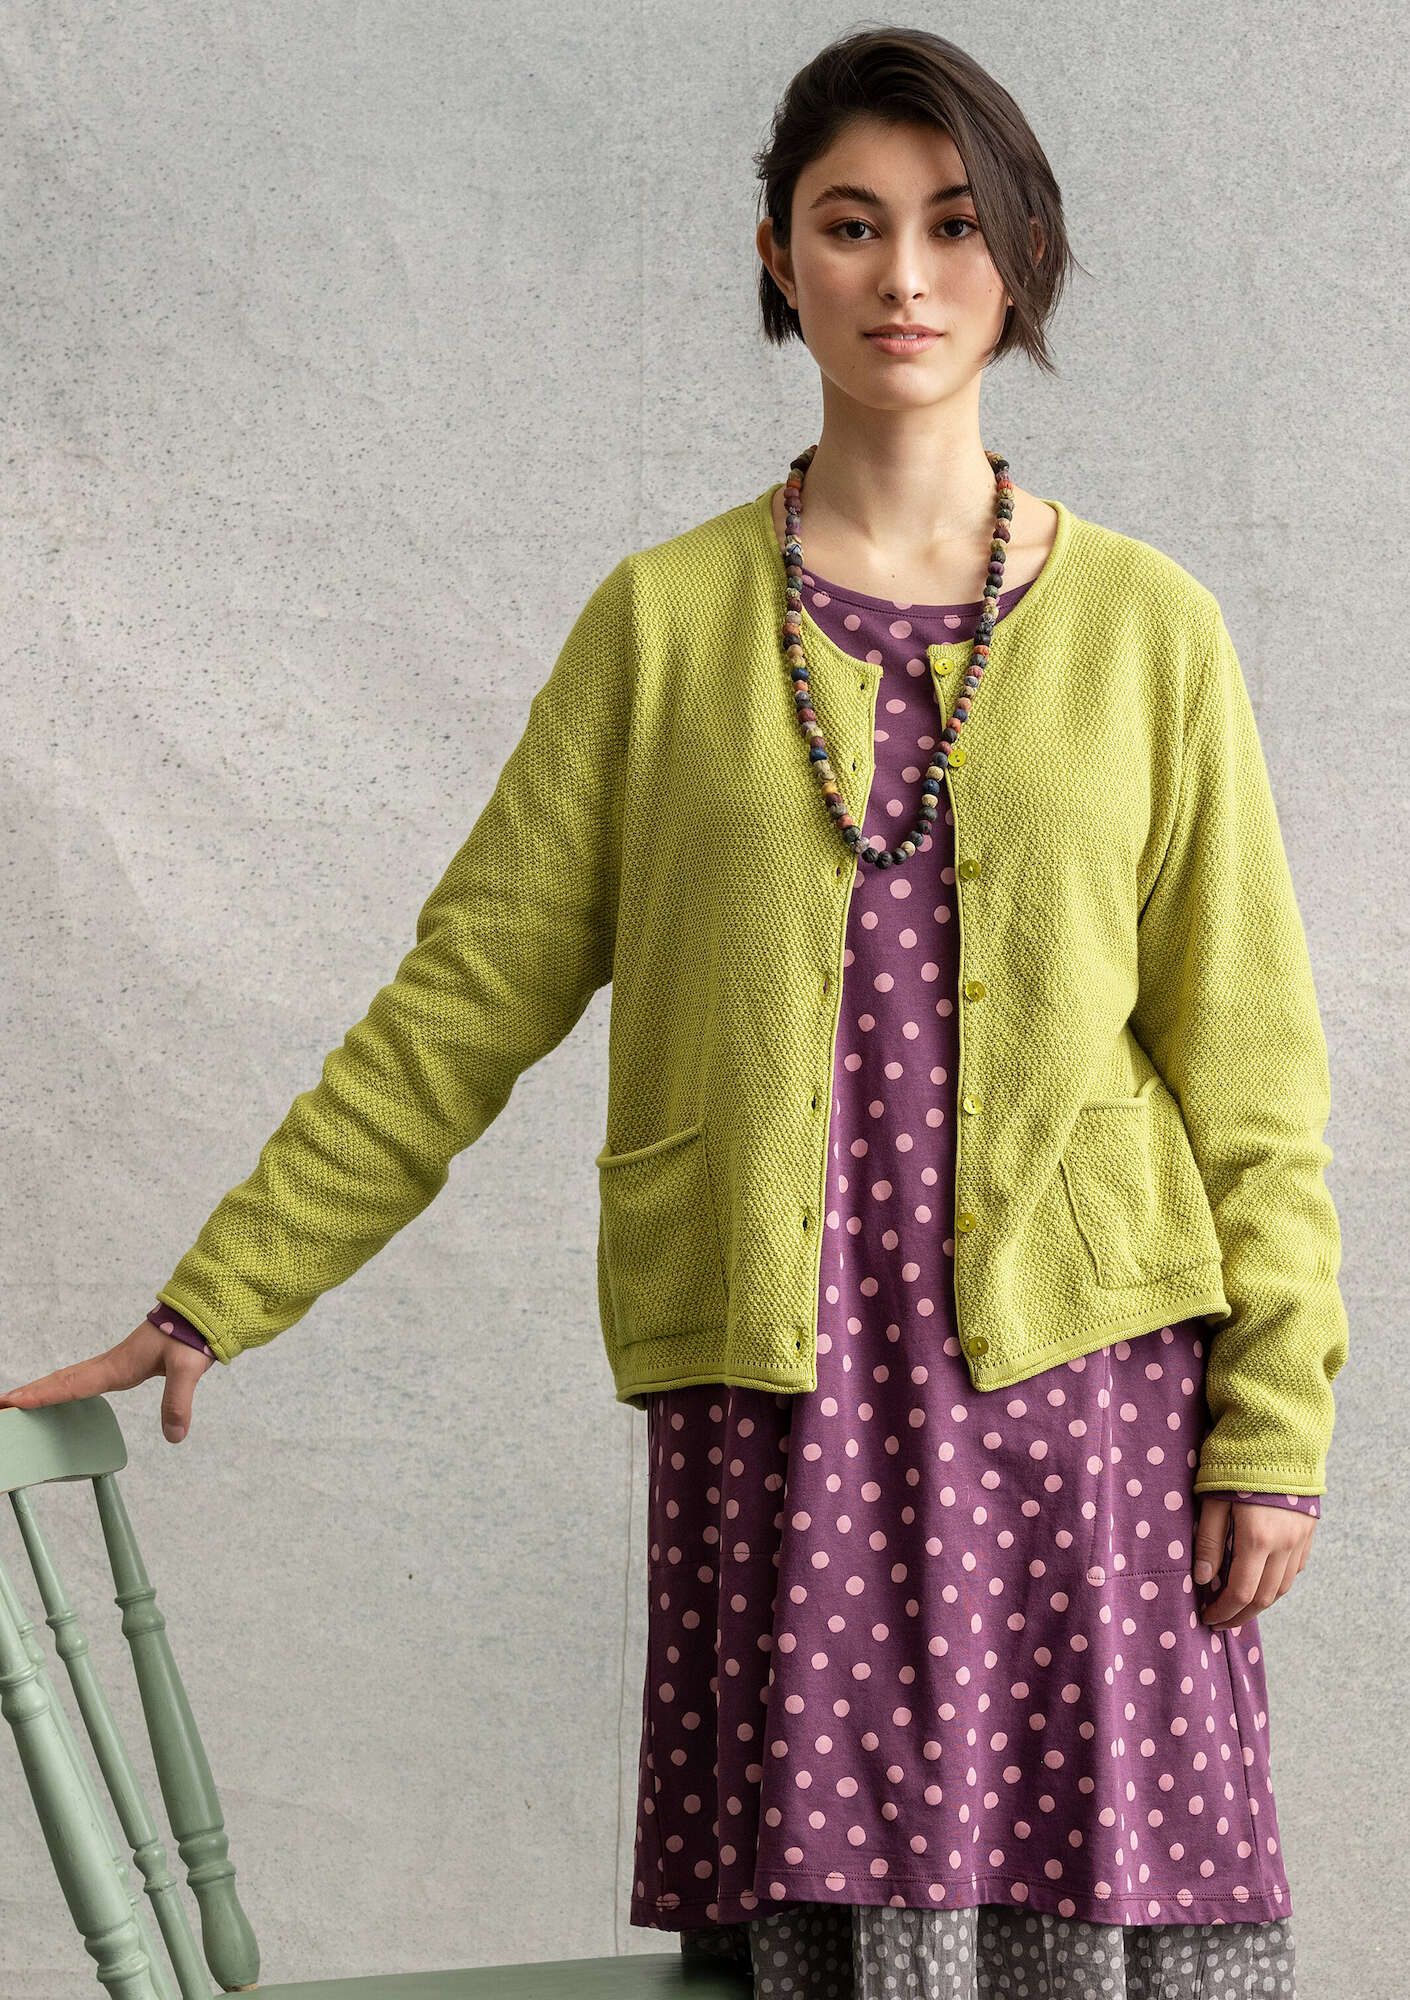 Moss-stitch knit cardigan in recycled cotton guava